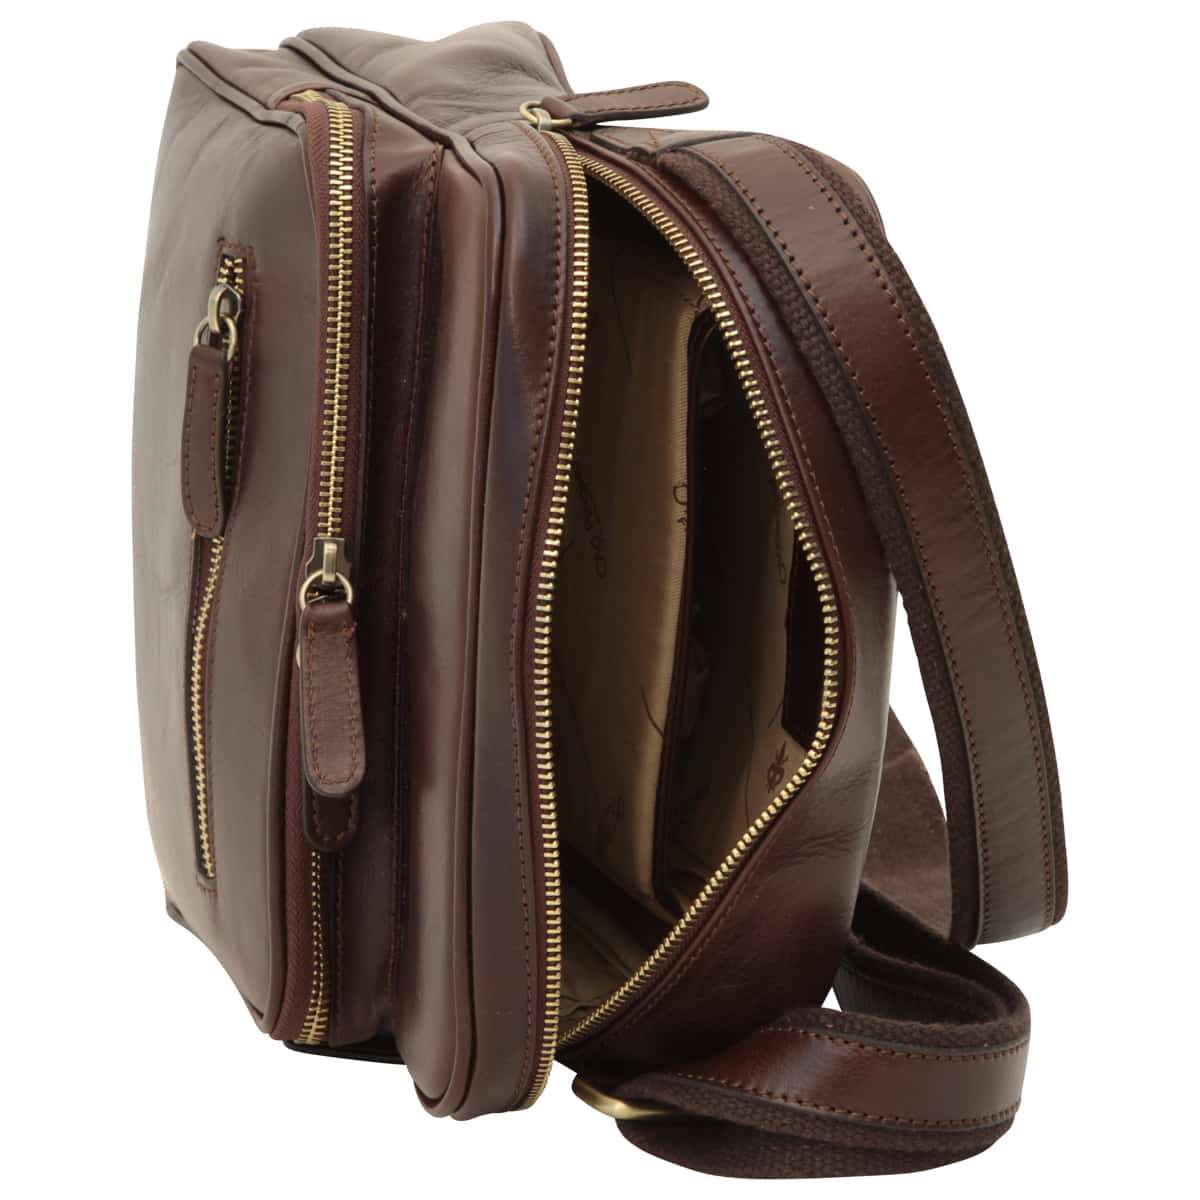 Small leather bag with zip closures - Dark Brown | 409389TM UK | Old Angler Firenze